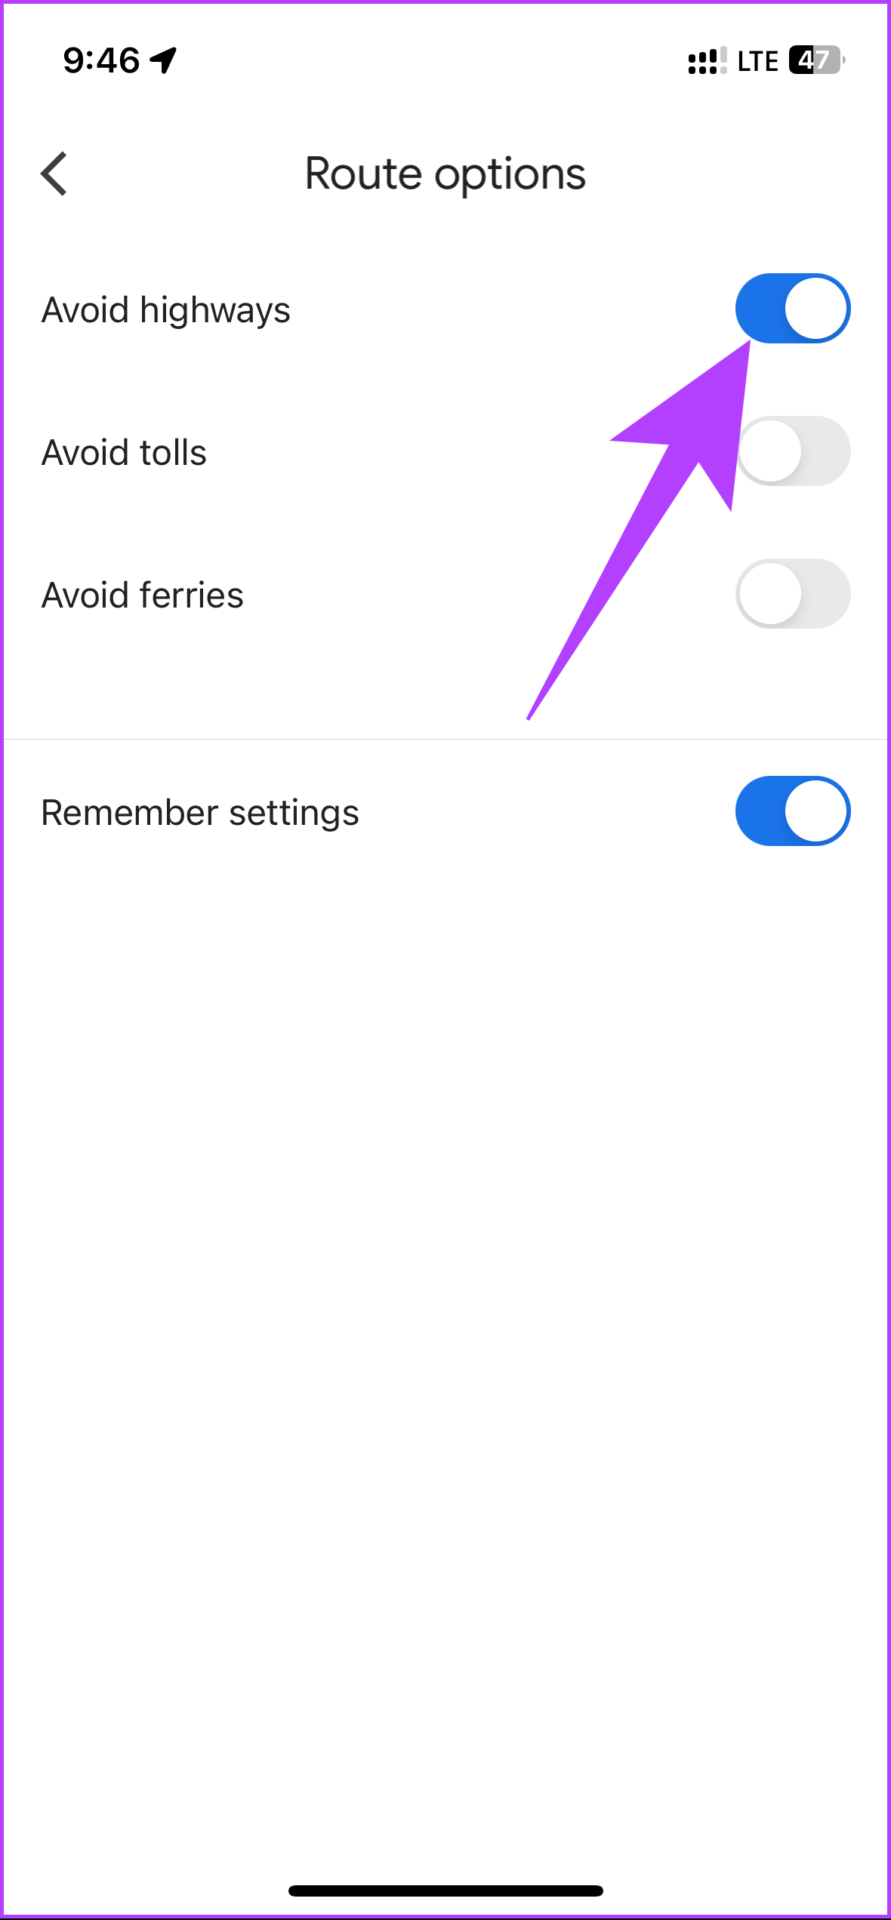 toggle on Avoid highways and go back